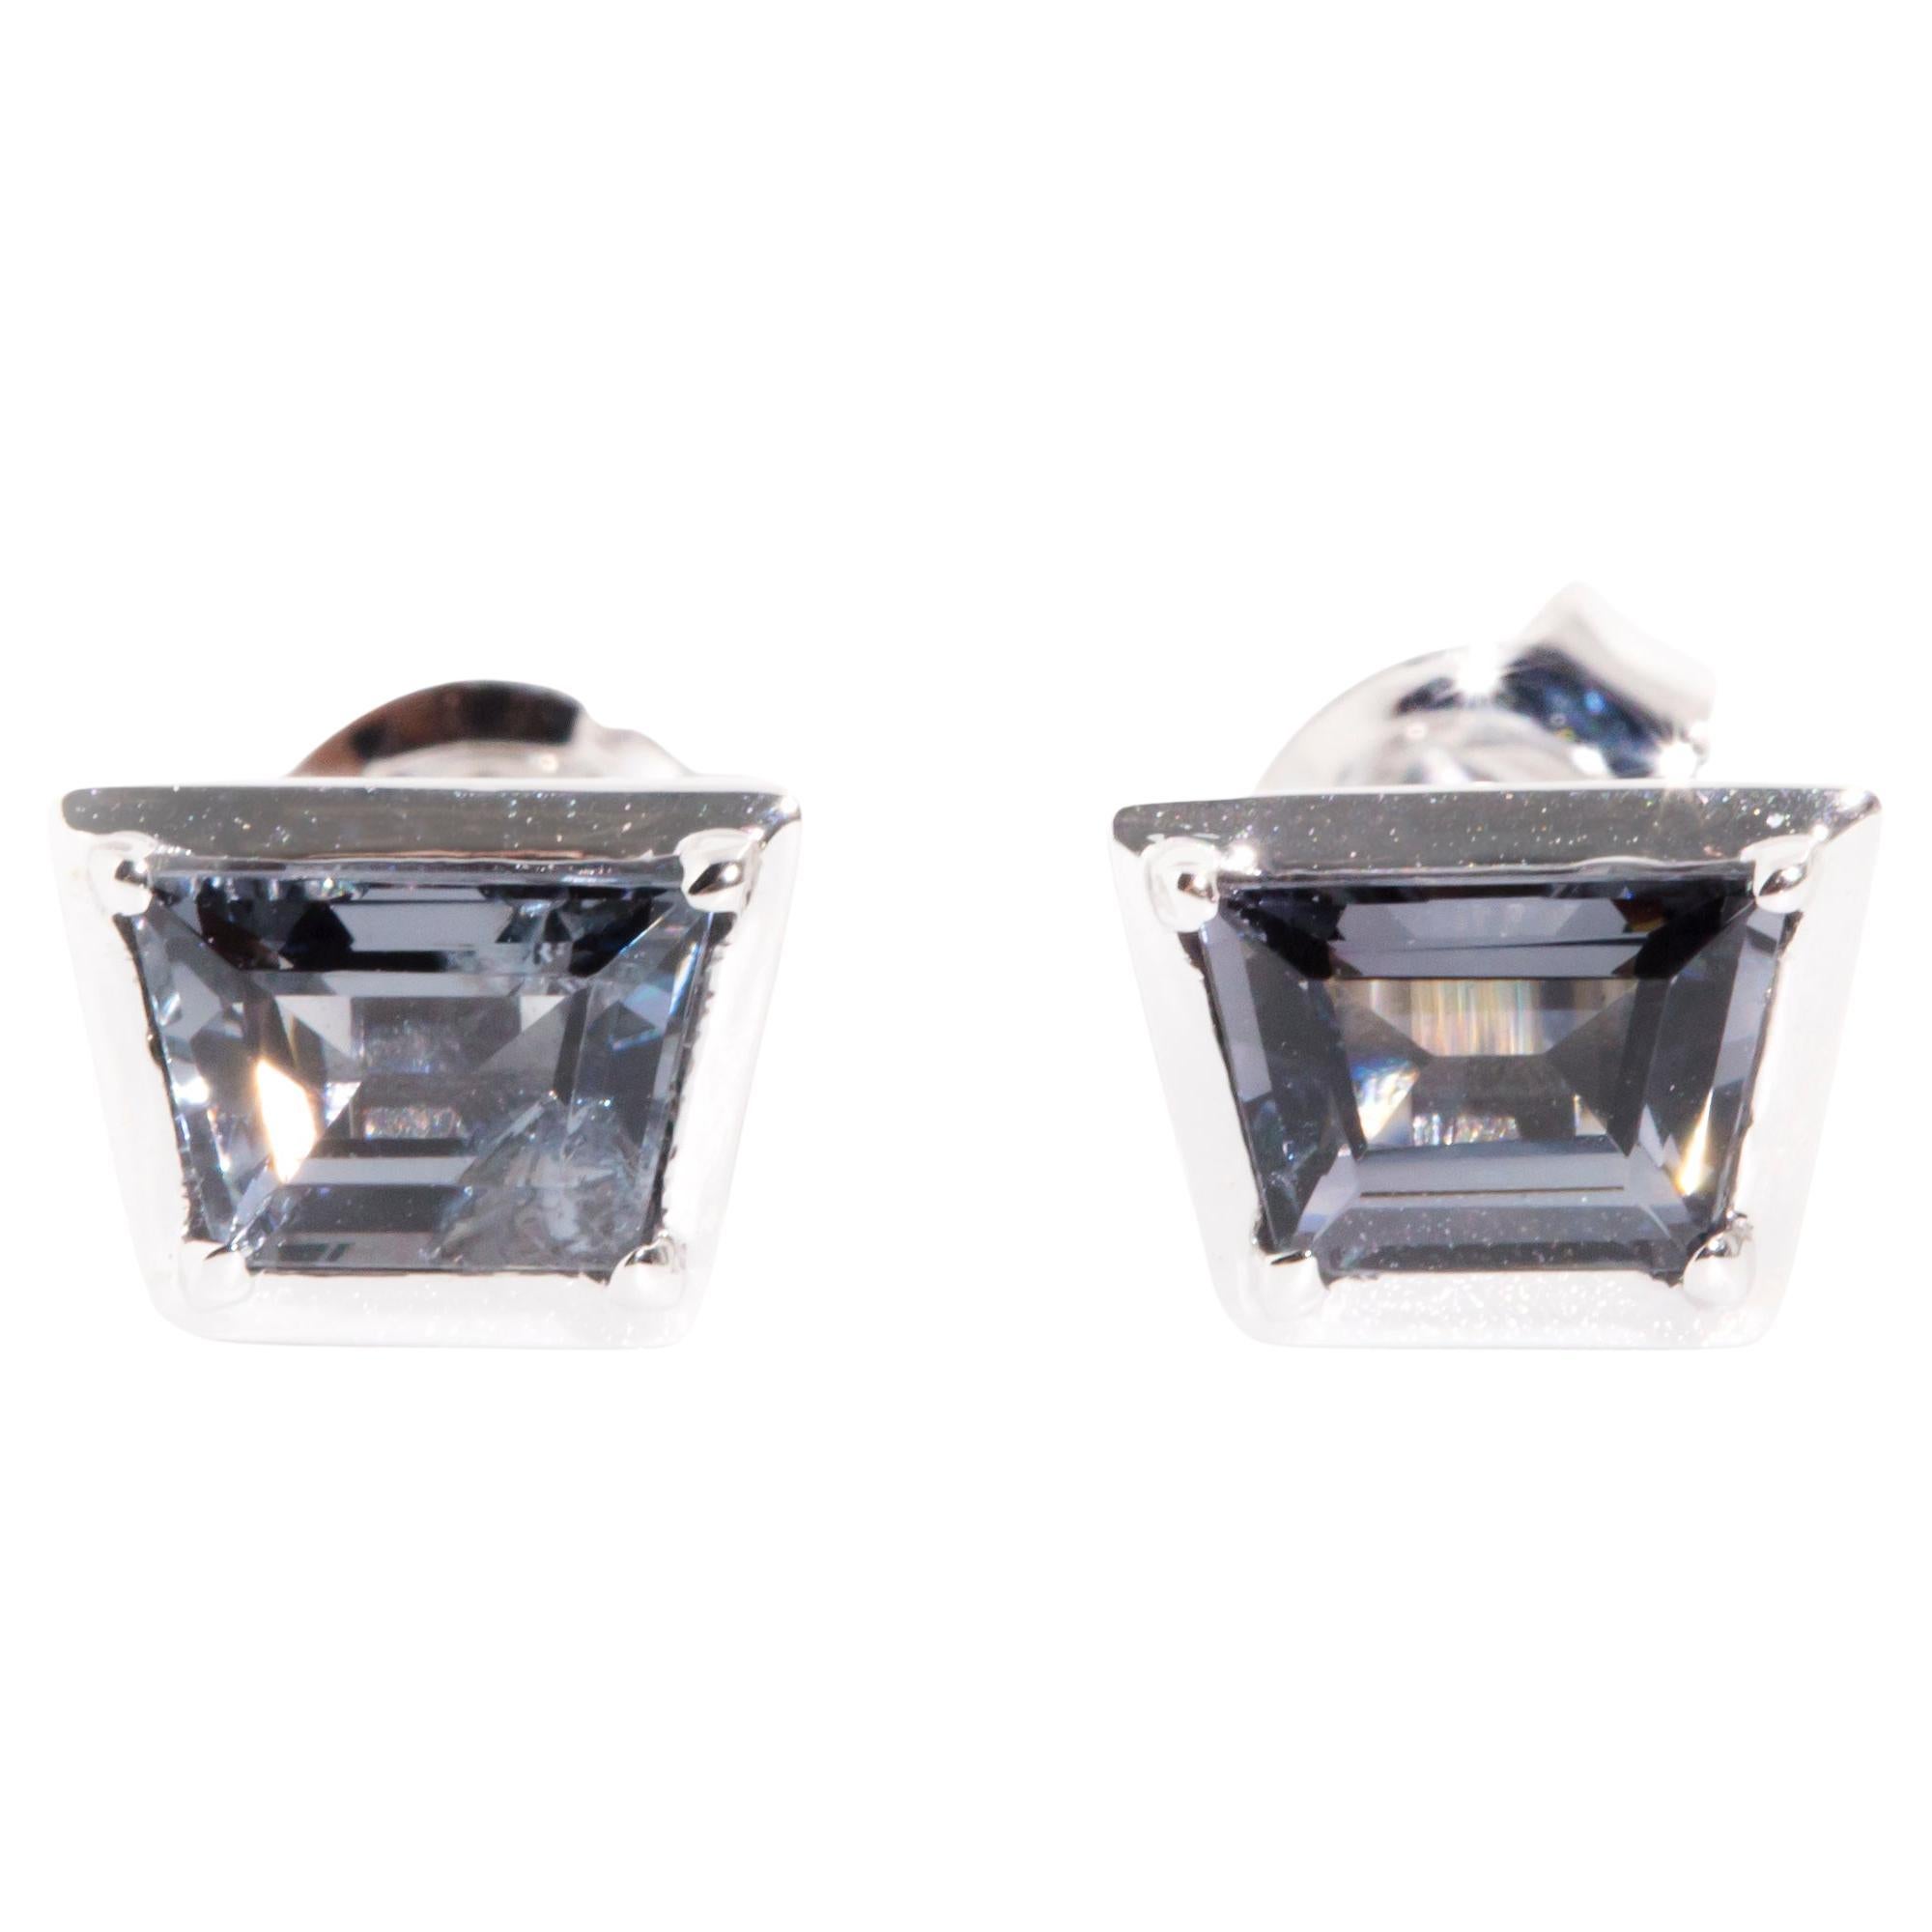 Crafted in 9 carat white gold, these alluring contemporary stud style earrings each feature a wonderous bright blue grey trapezoid cut spinel sitting in a gorgeous tapered bezel setting. We named these petite studs The Lucie Earrings. She fits